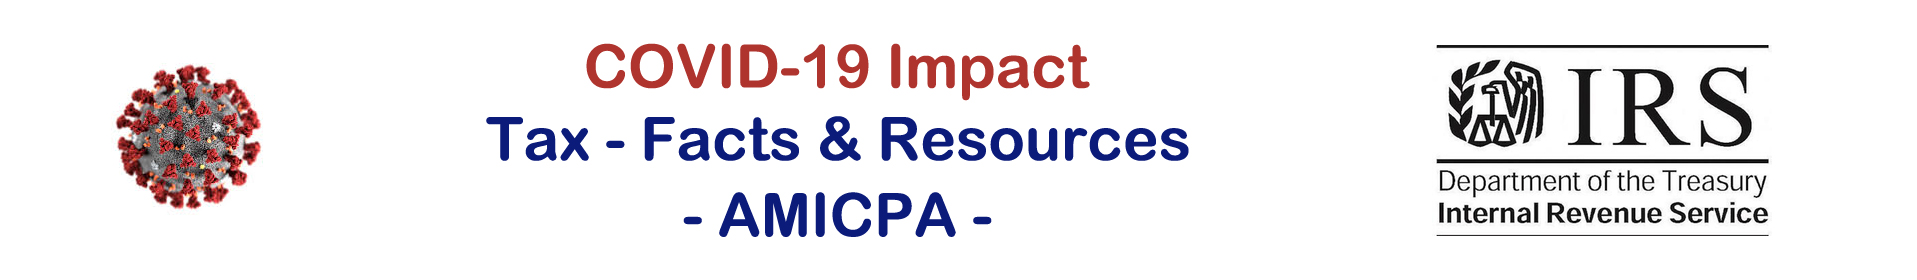 covid-19 impact tax facts resources amicpa